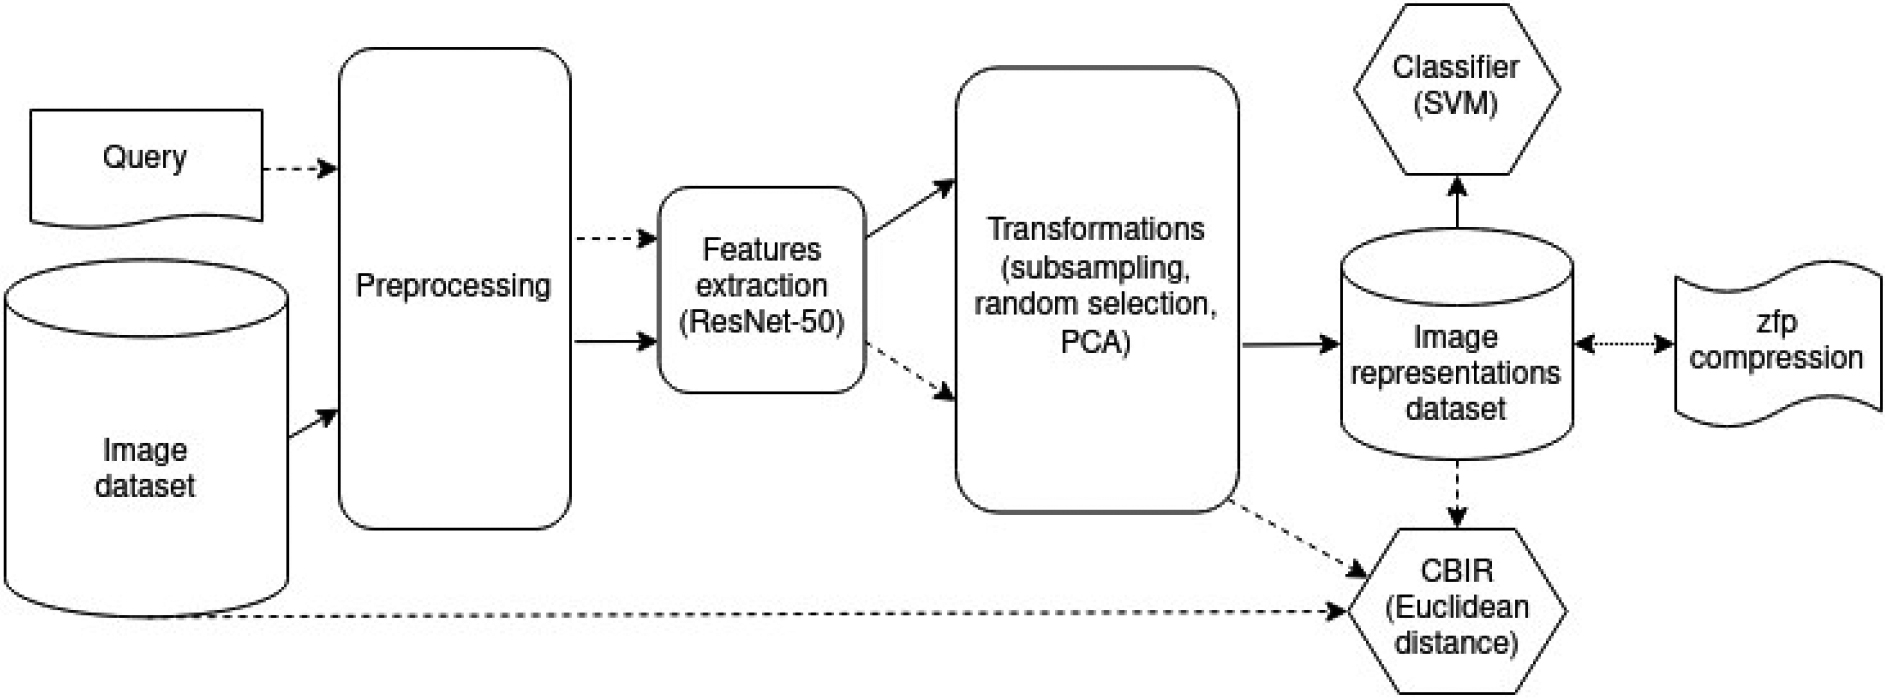 A general picture of the proposed approach. The regular arrows indicate the data flow in the classification task, and the arrows with a dashed line show the data flow in the CBIR task. ZFP compression is performed on a dataset of image representations.